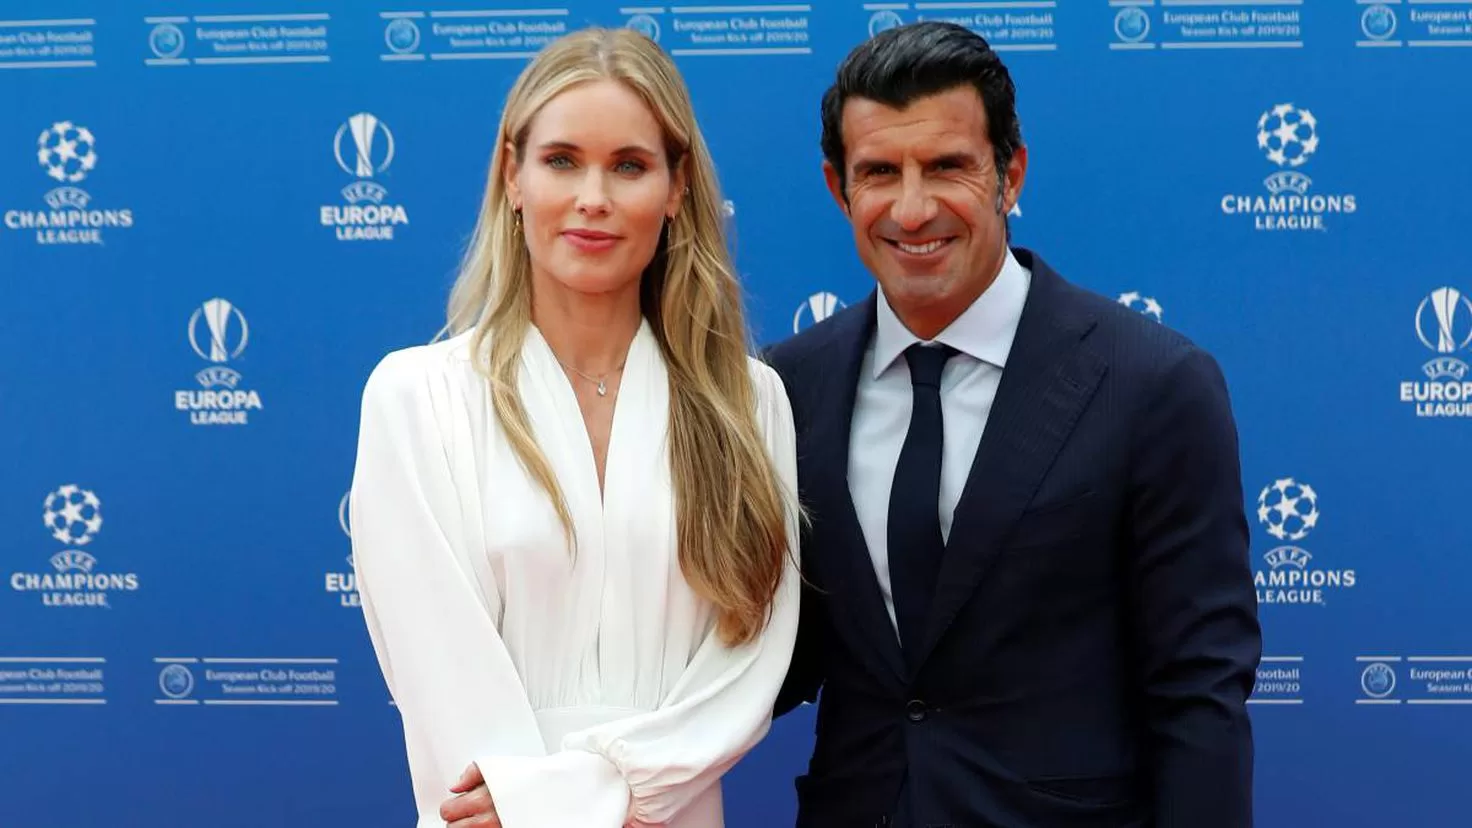 Figo responds to an article that says his wedding was a fraud
